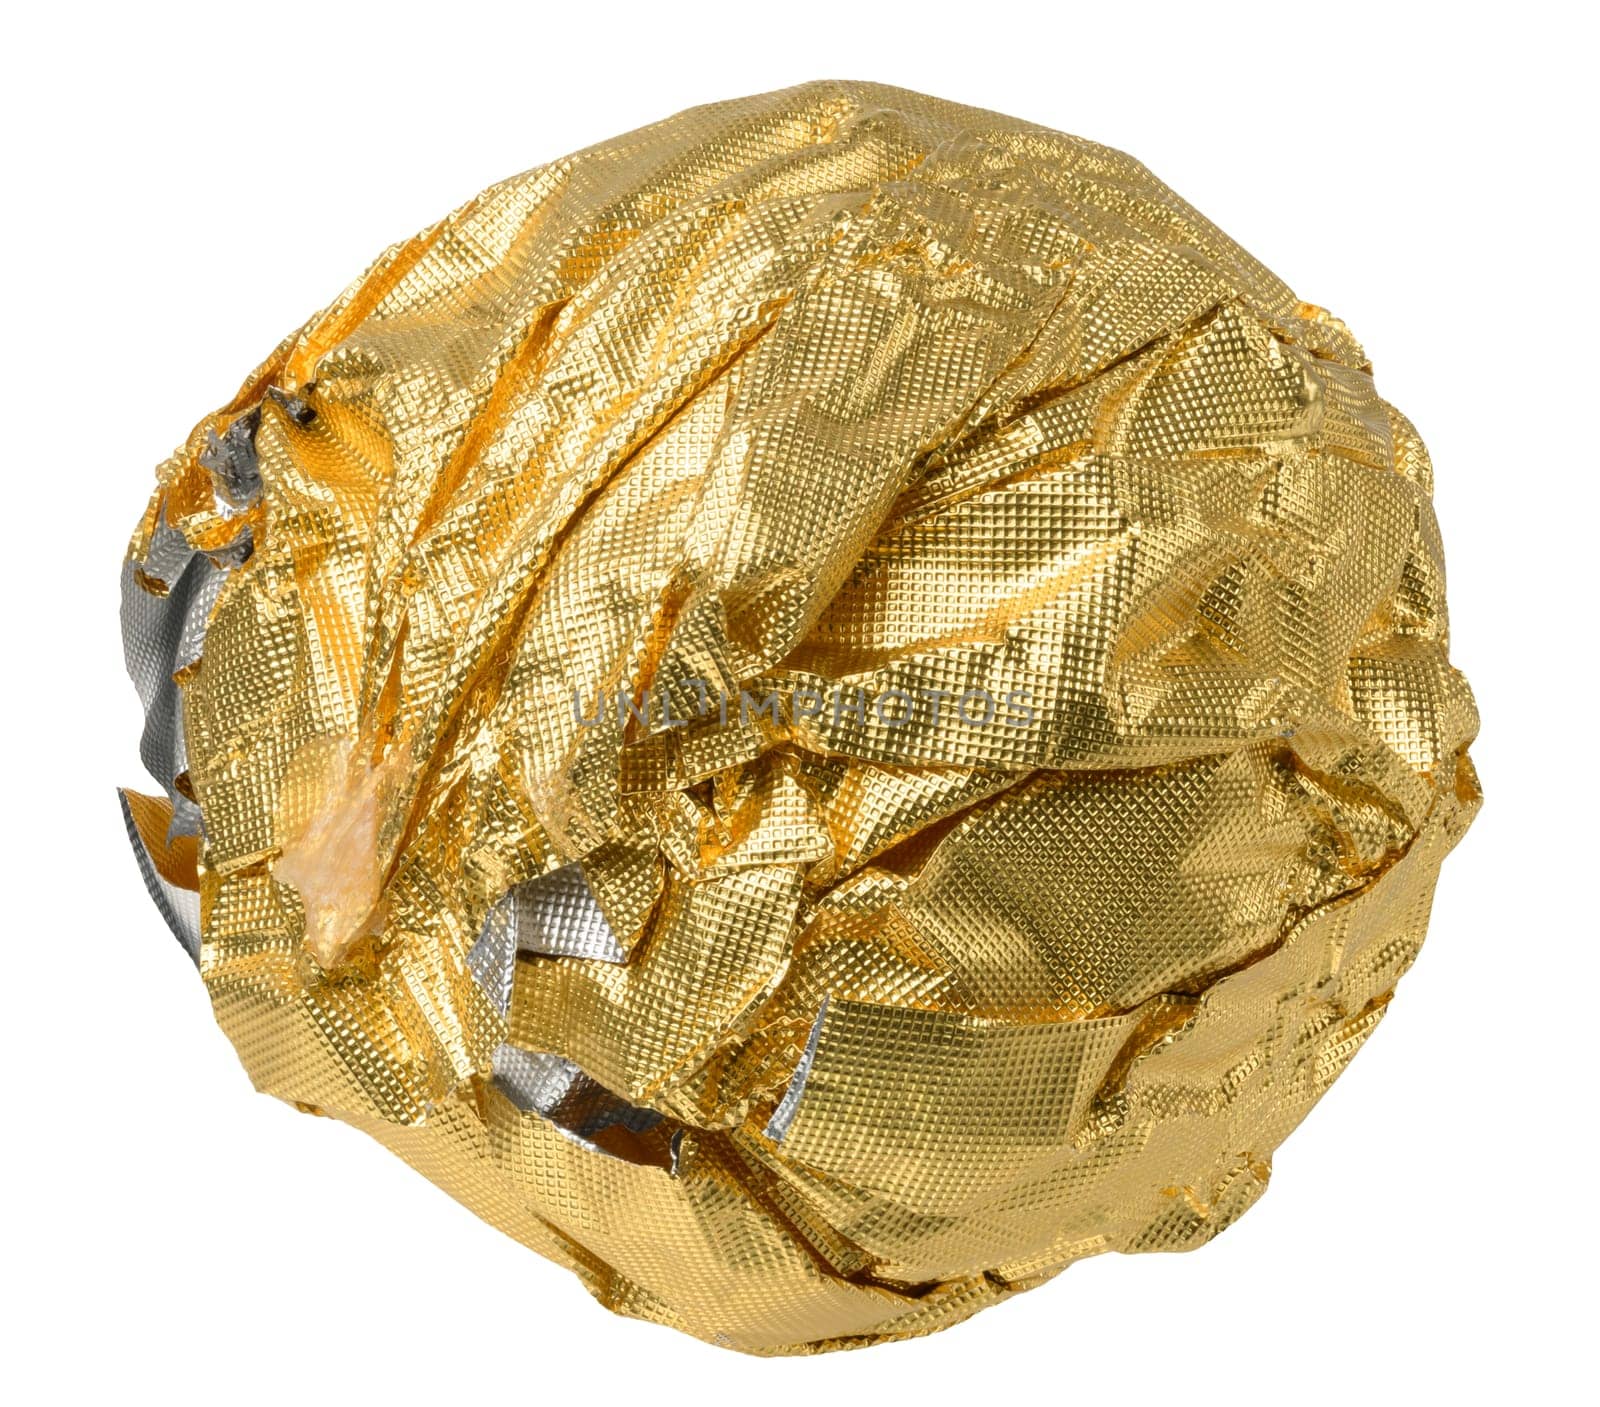 Ball of crumpled golden foil on isolated background by ndanko